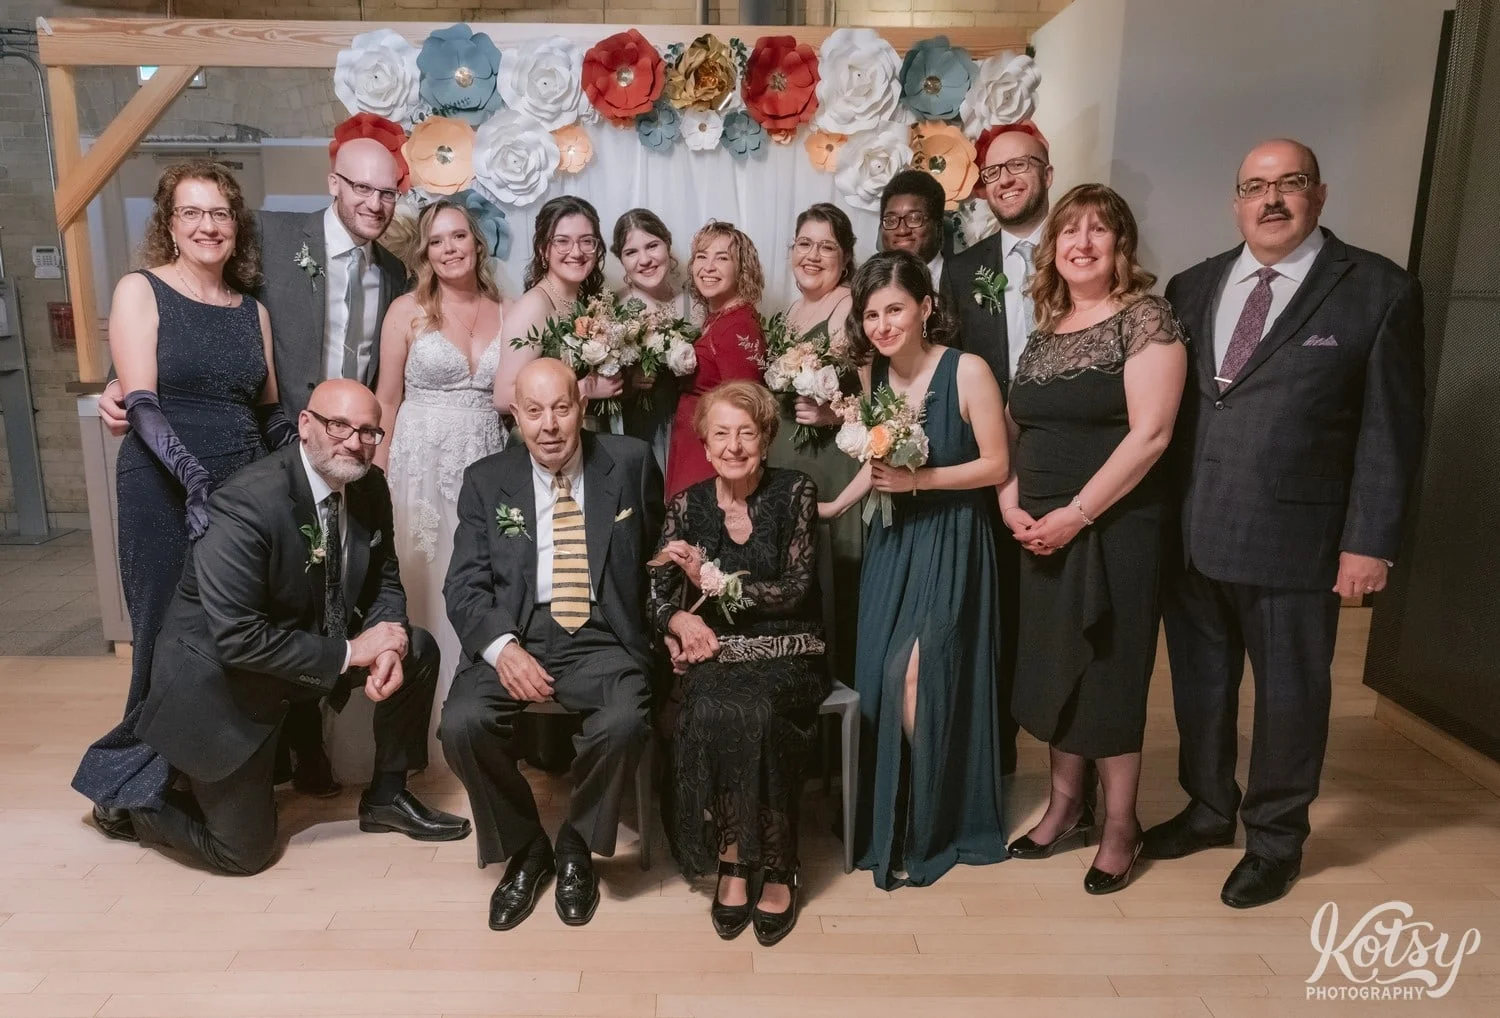 A family group shot in front of a backdrop during a Second Floor Events wedding reception in Toronto, Canada.